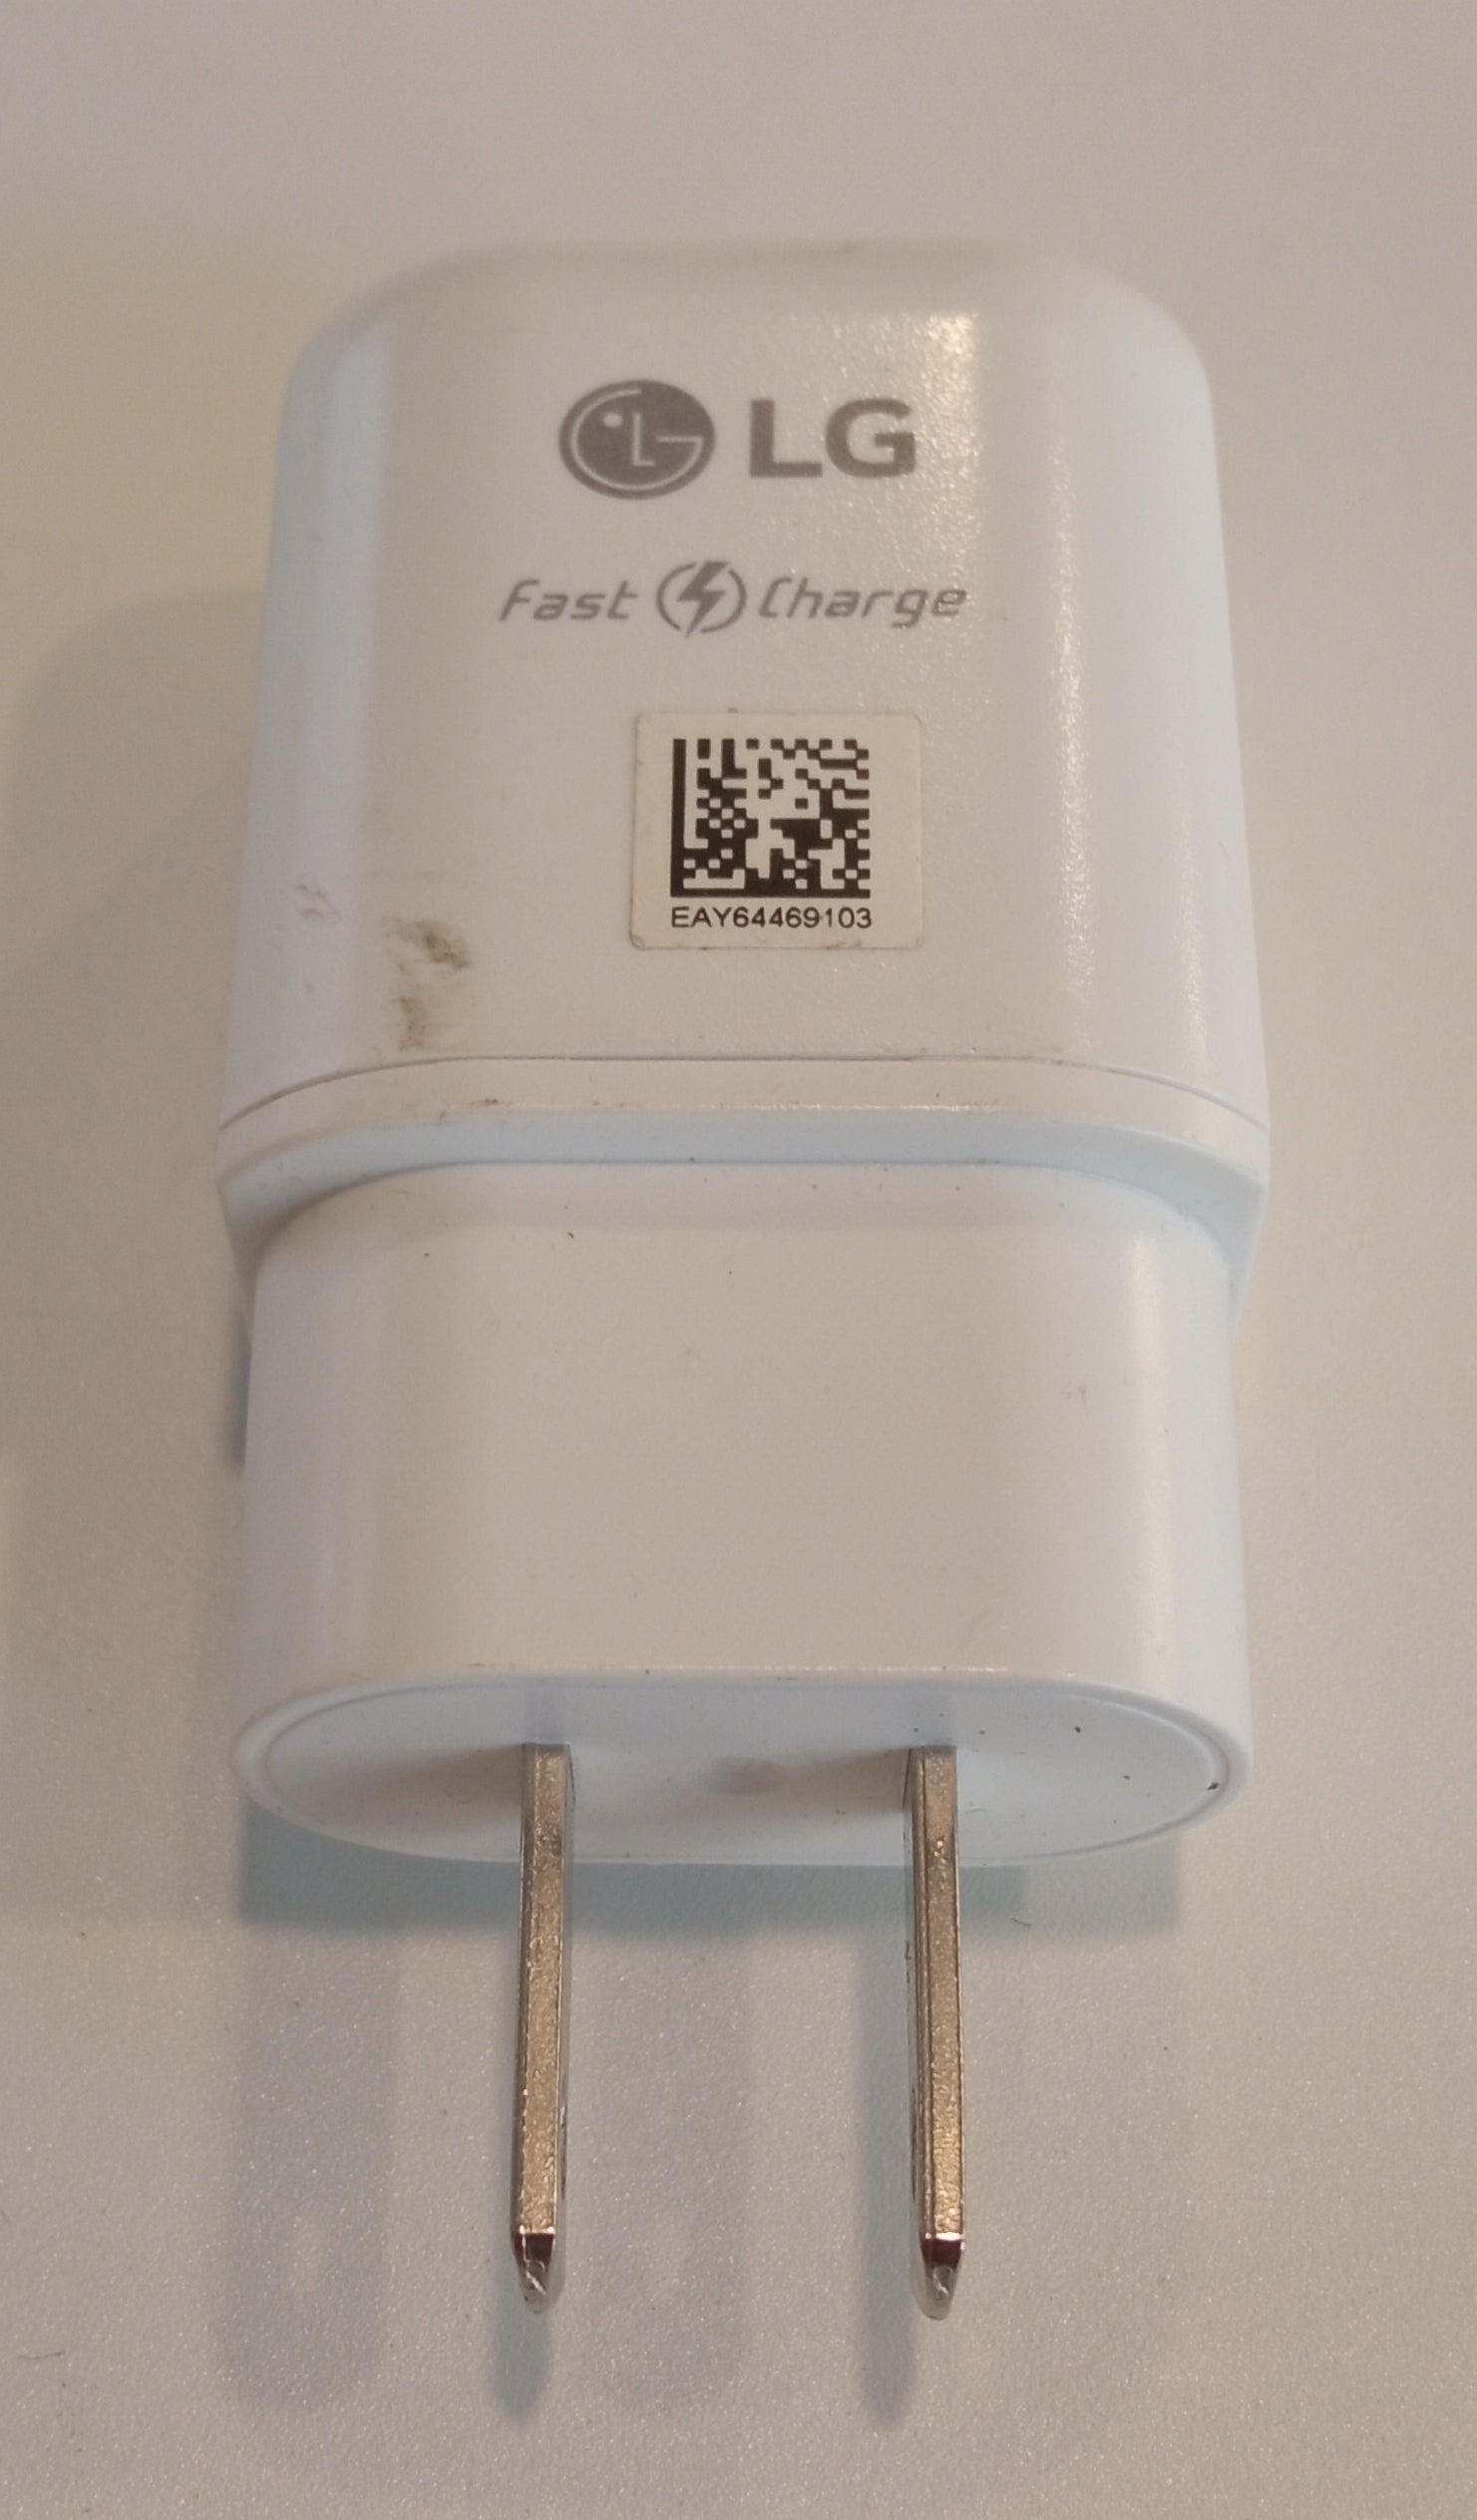 LG Fast Charge USB Adapter - US Imported